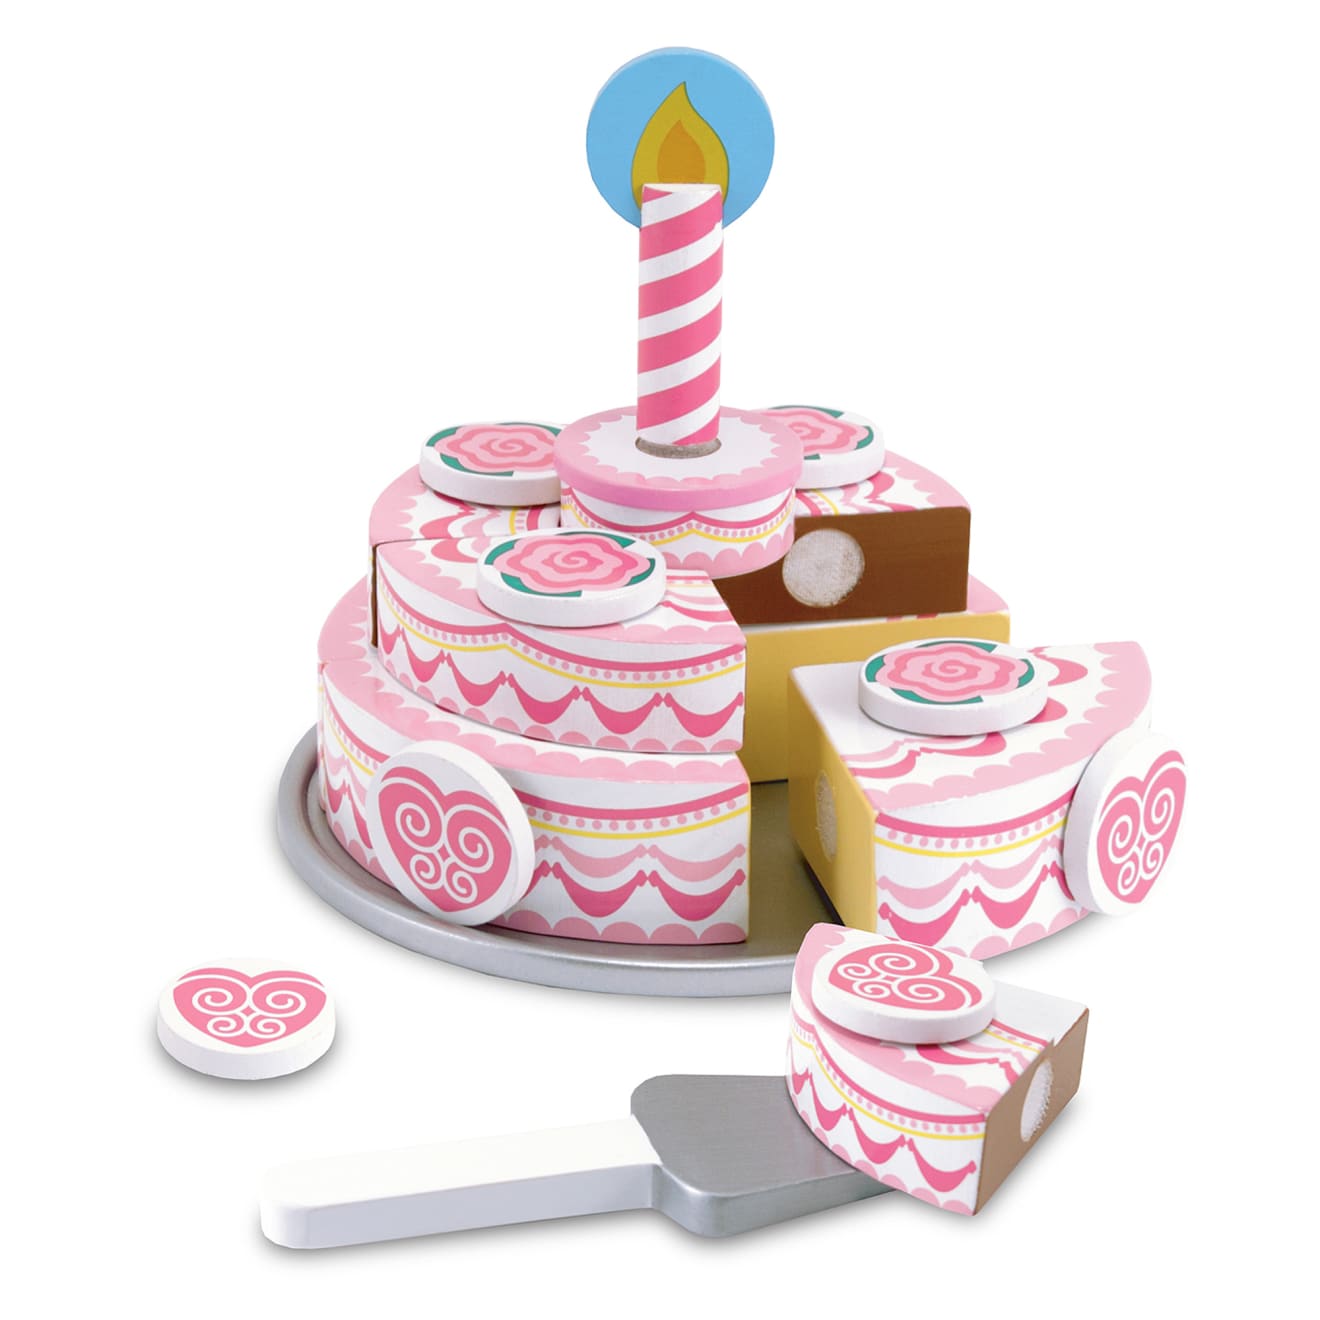 Rattle Toys Half Birthday 1 Kg Cake by Cake Square Chennai |Online Cake  Delivery | Special Cakes - Cake Square Chennai | Cake Shop in Chennai